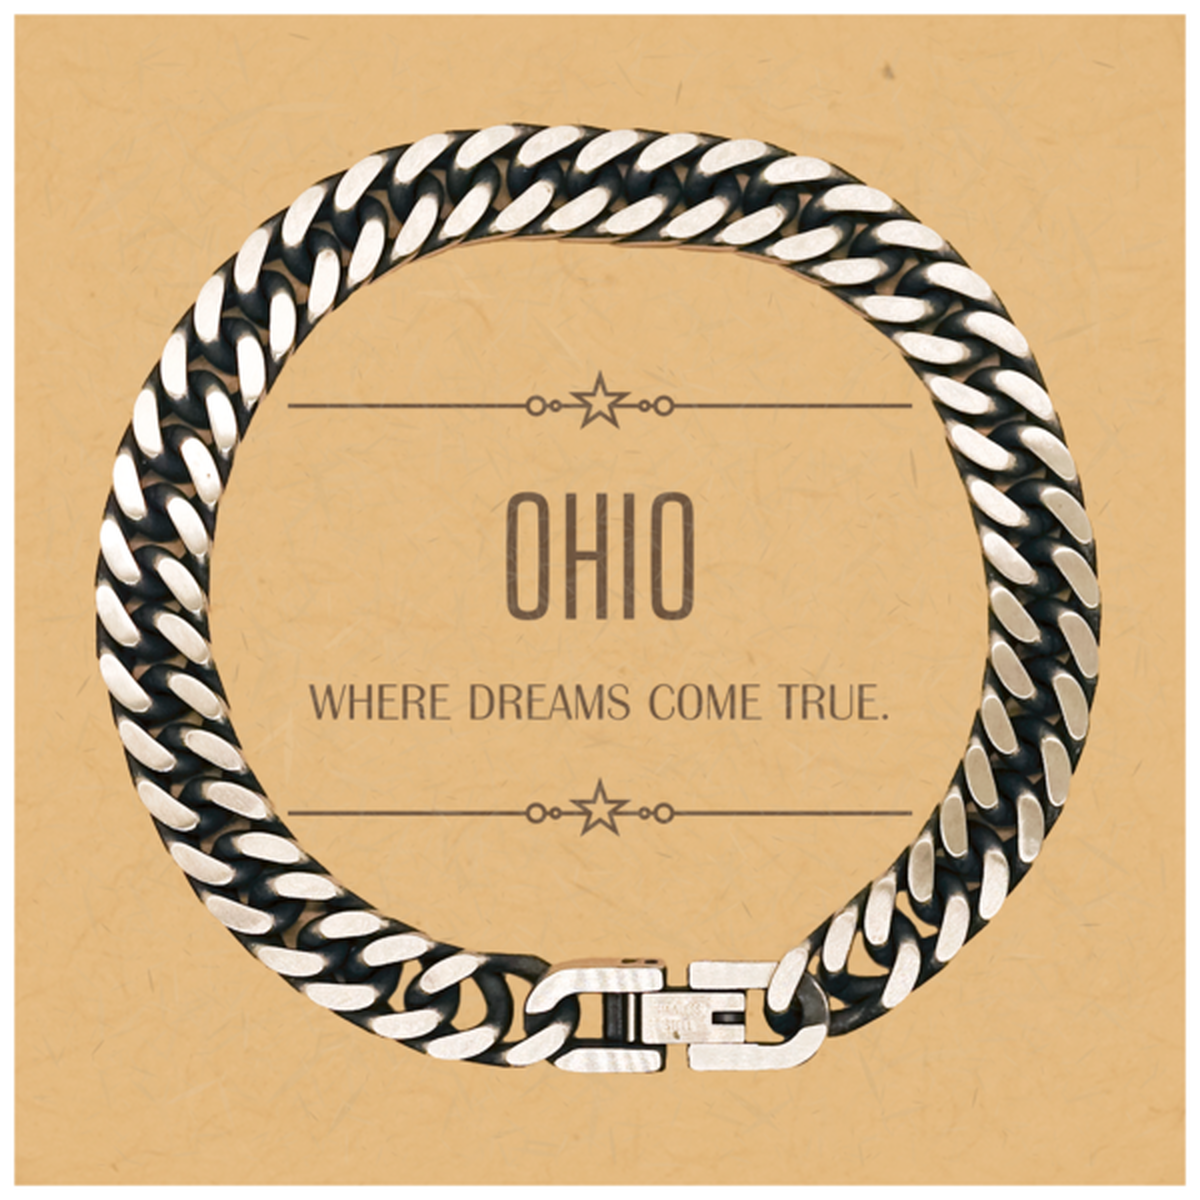 Love Ohio State Cuban Link Chain Bracelet, Ohio Where dreams come true, Birthday Christmas Inspirational Gifts For Ohio Men, Women, Friends